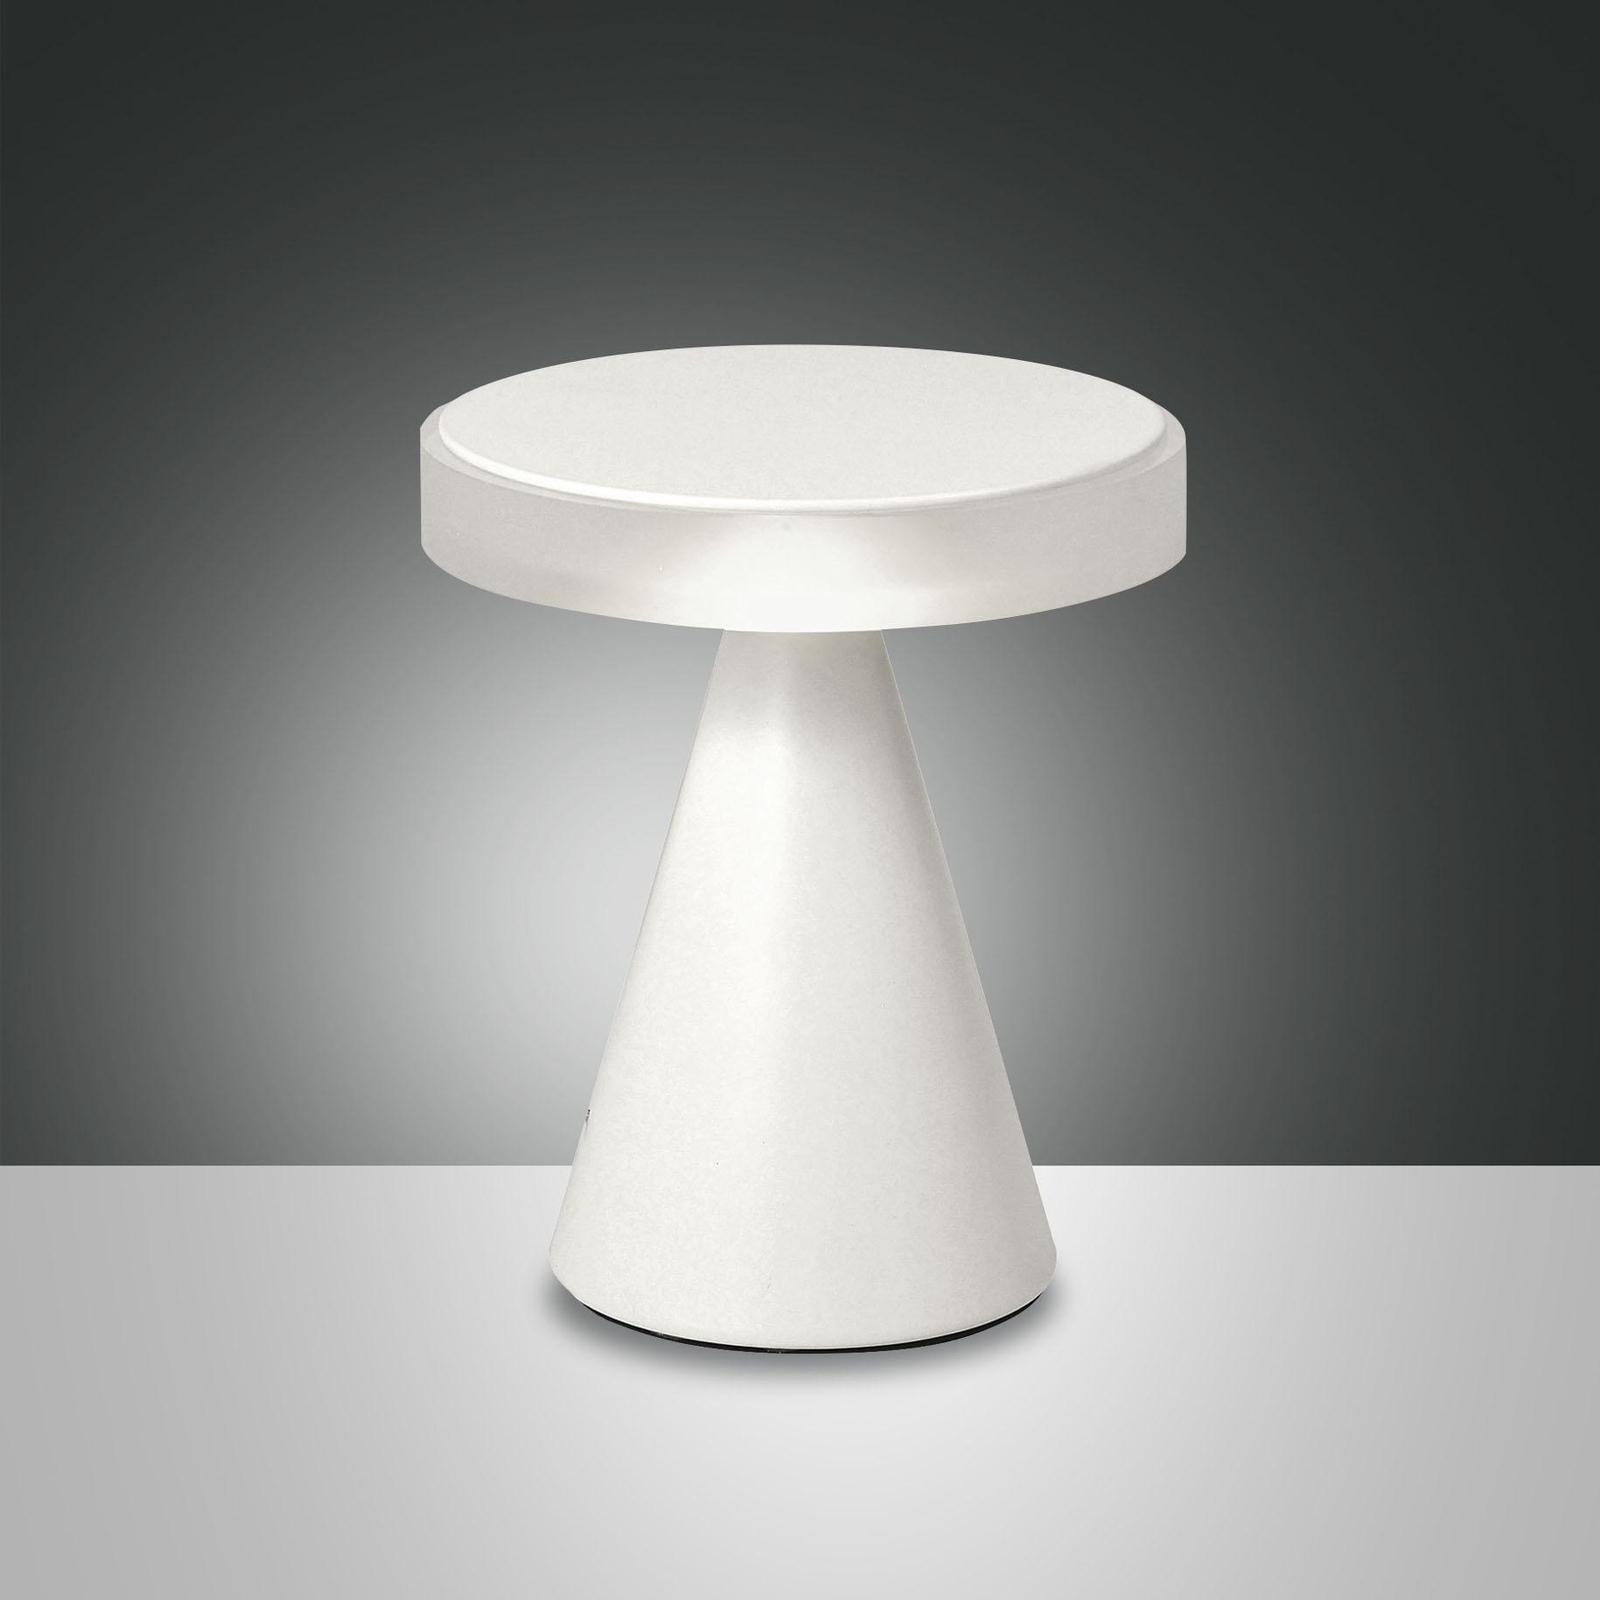 LED table lamp Neutra, height 20 cm, white, touch dimmer